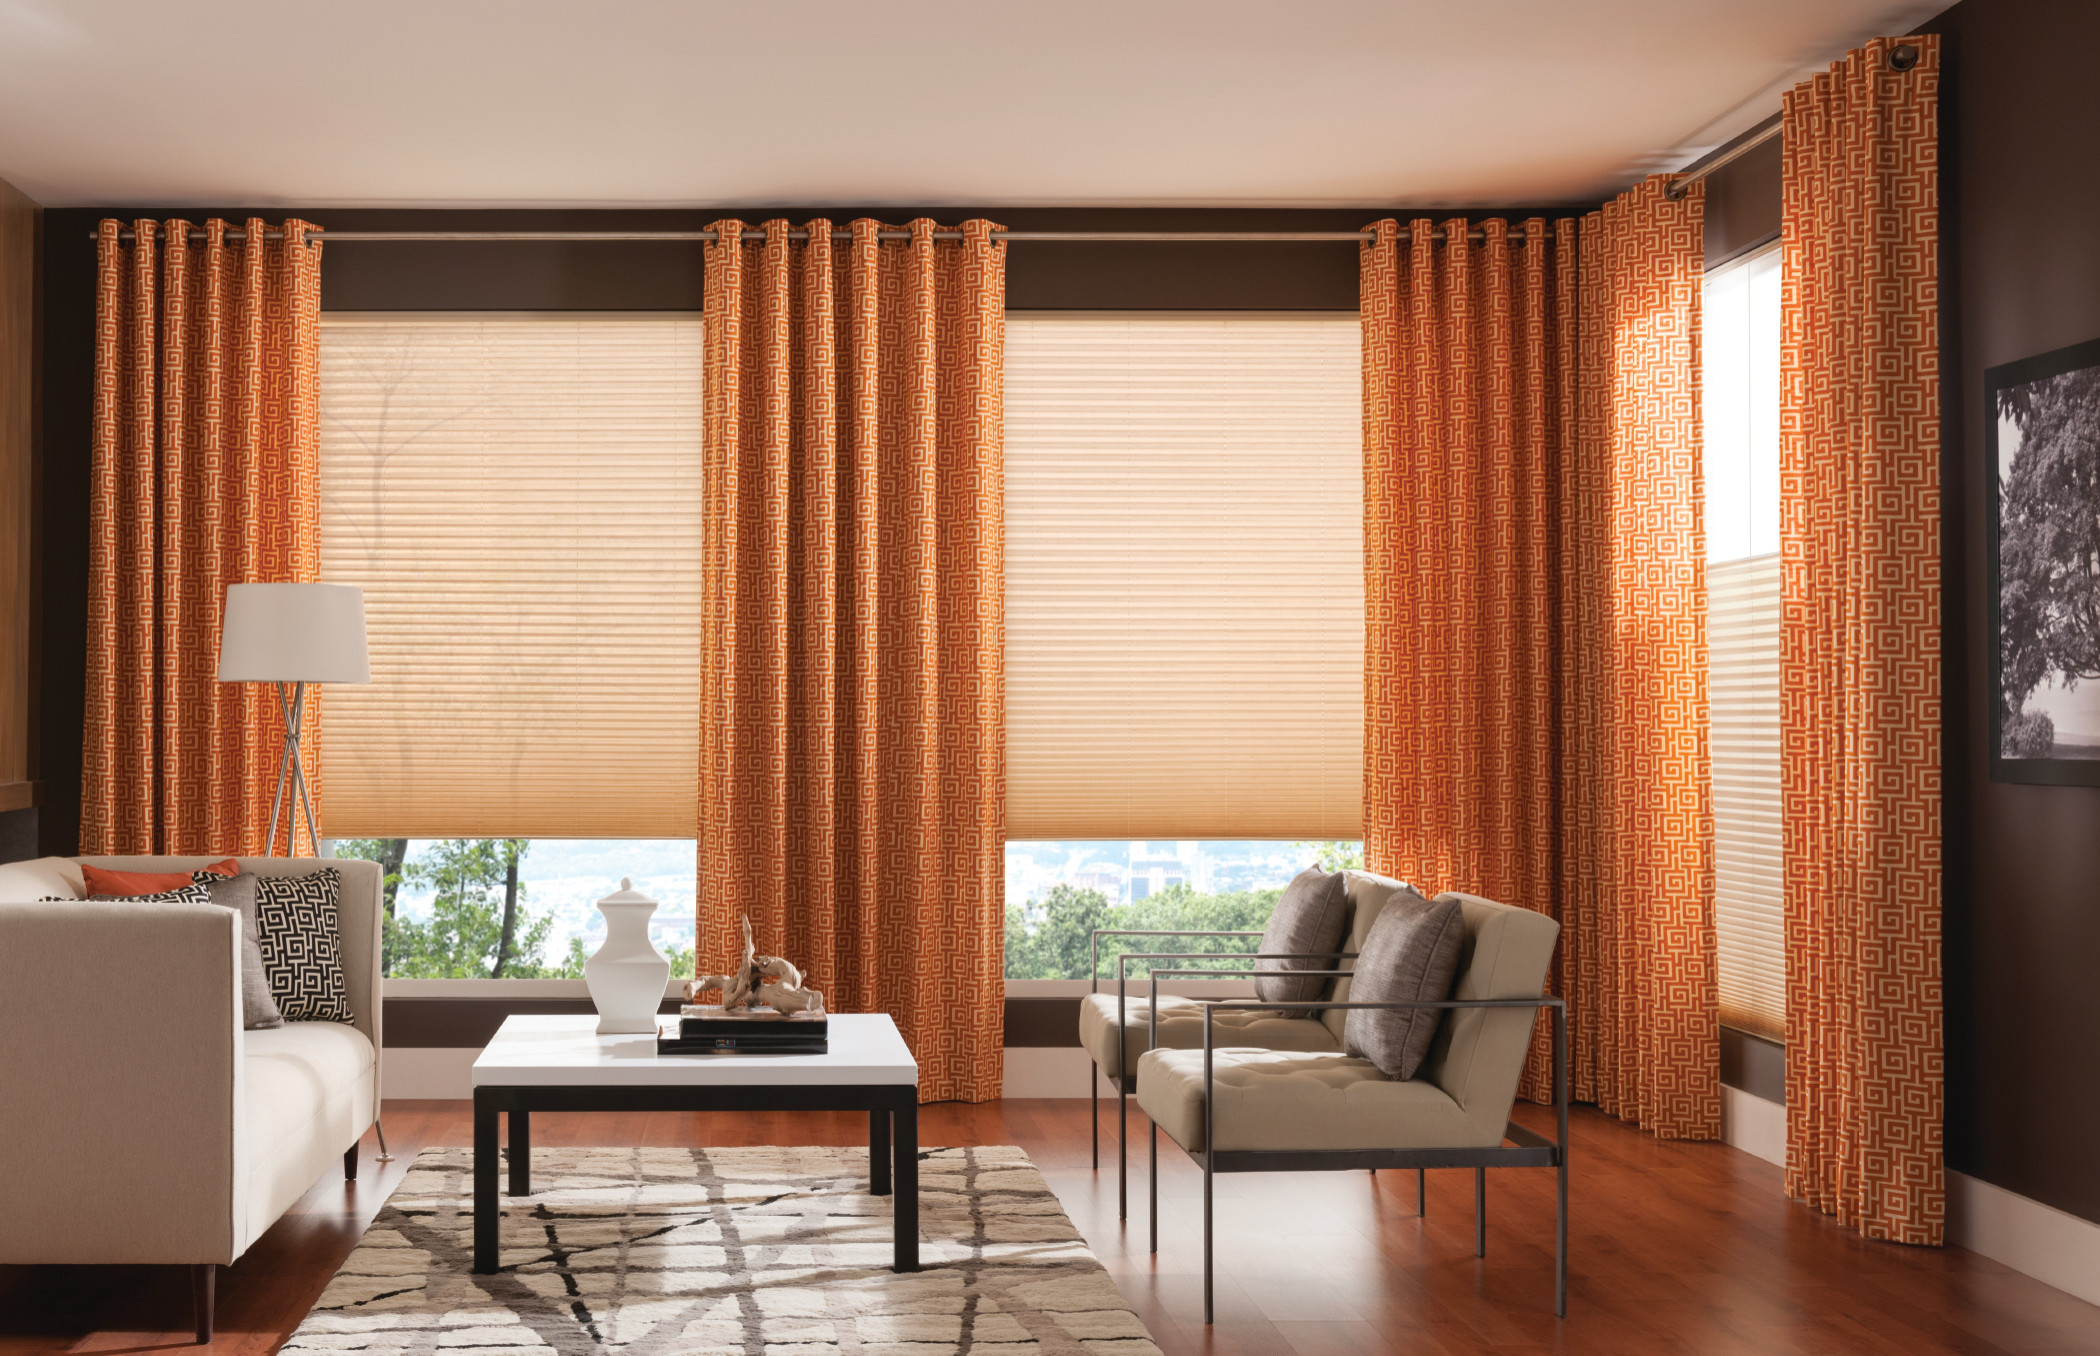 Curtains With Blinds Living Room Ideas, Living Room With Blinds